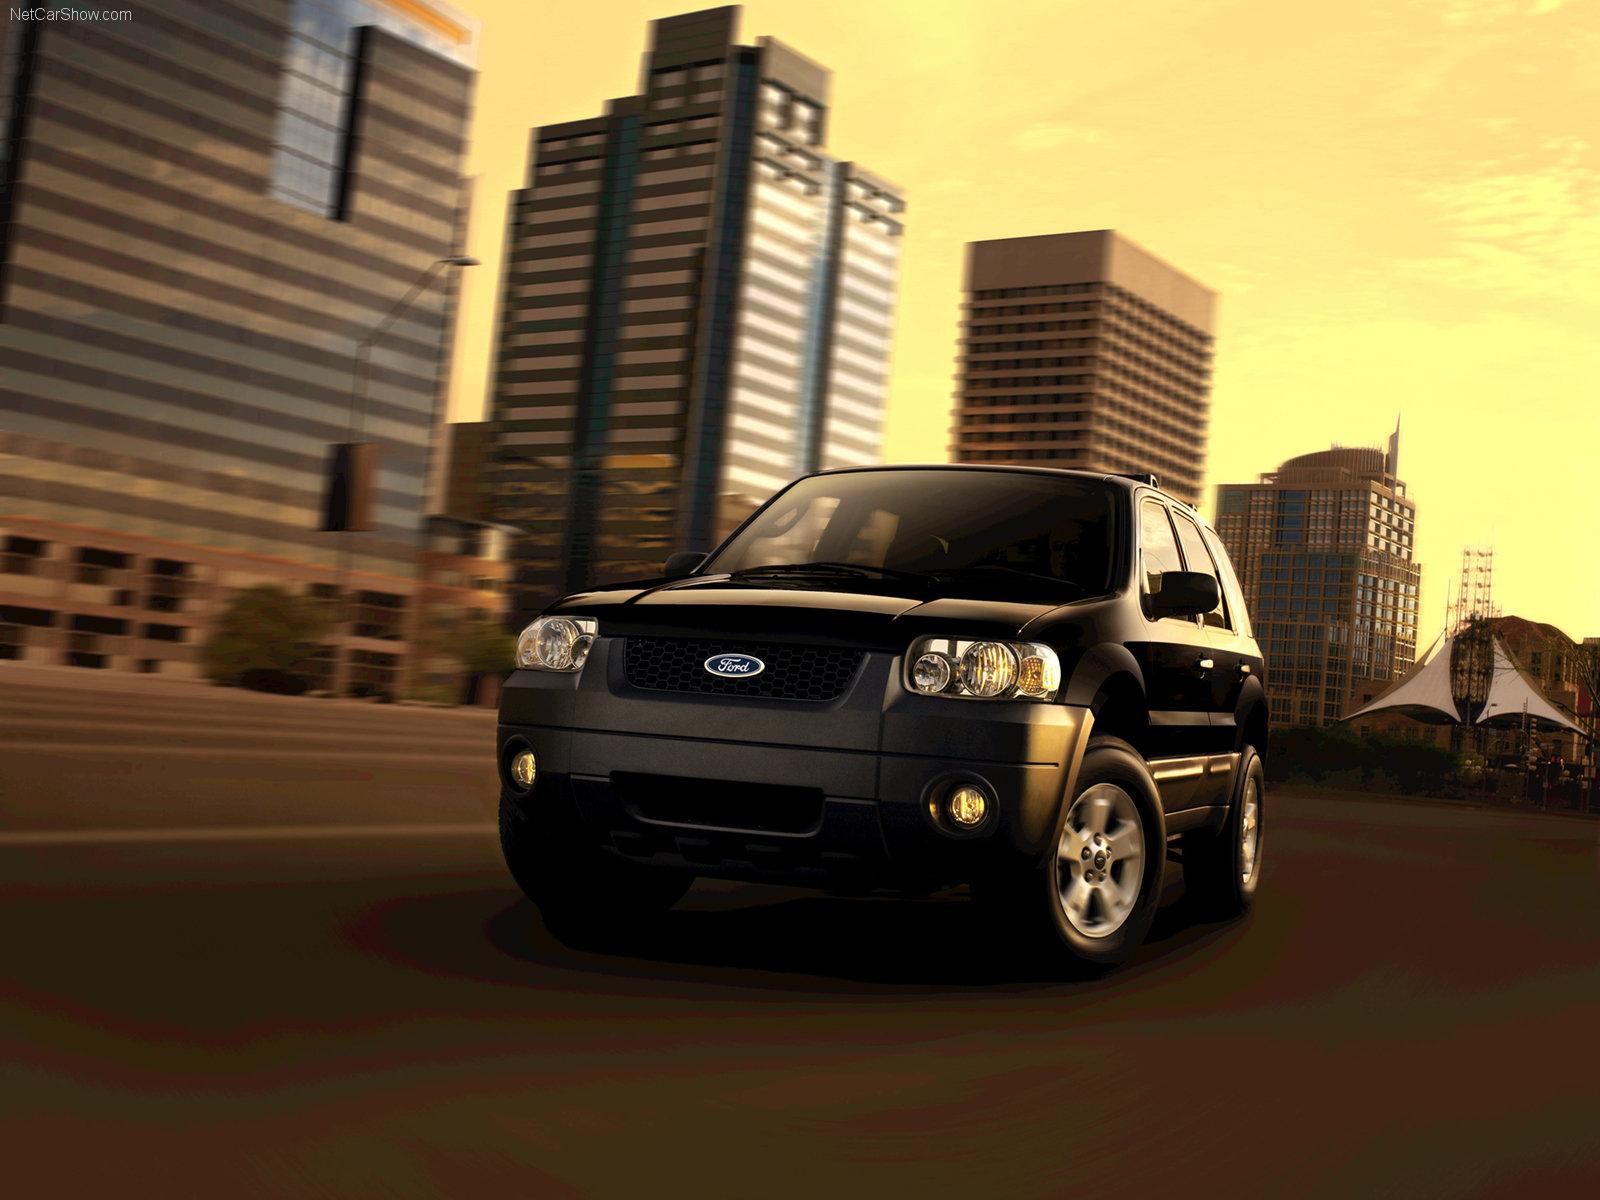 Ford Escape Wallpapers